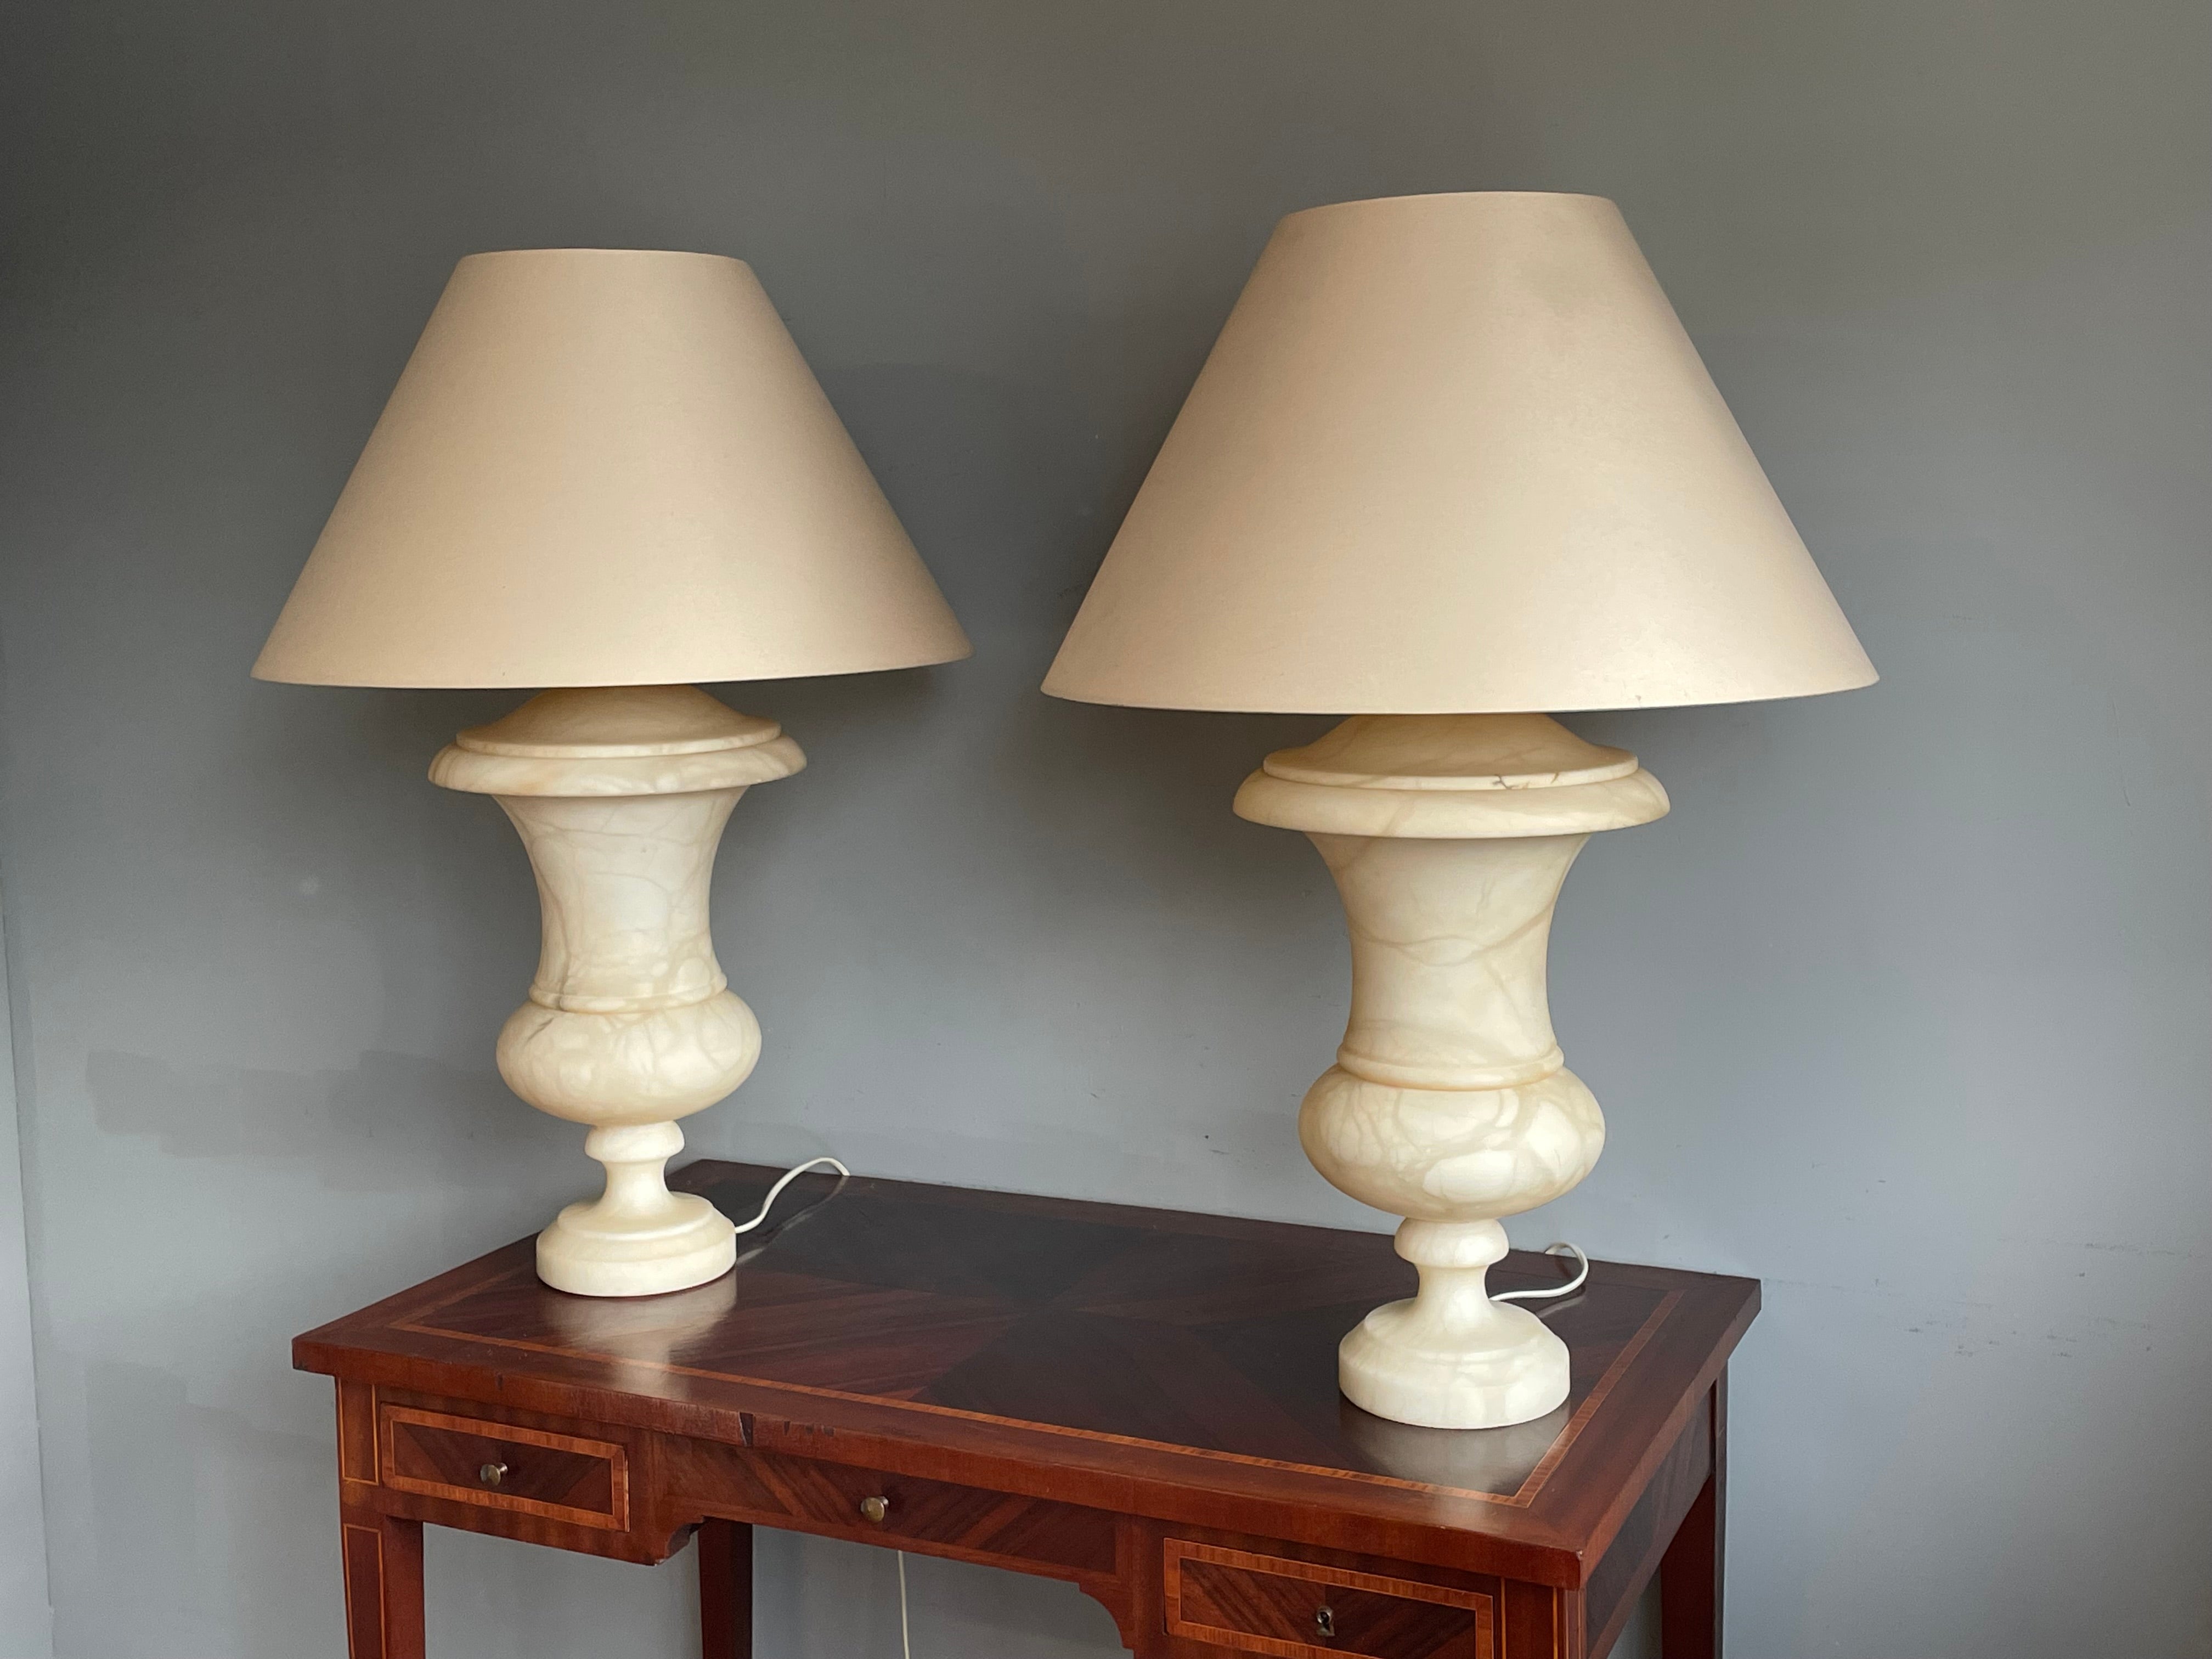 Neoclassical Stunning & Large Pair of Hand Carved Alabaster Urn Design Table lamps 1960-1970s